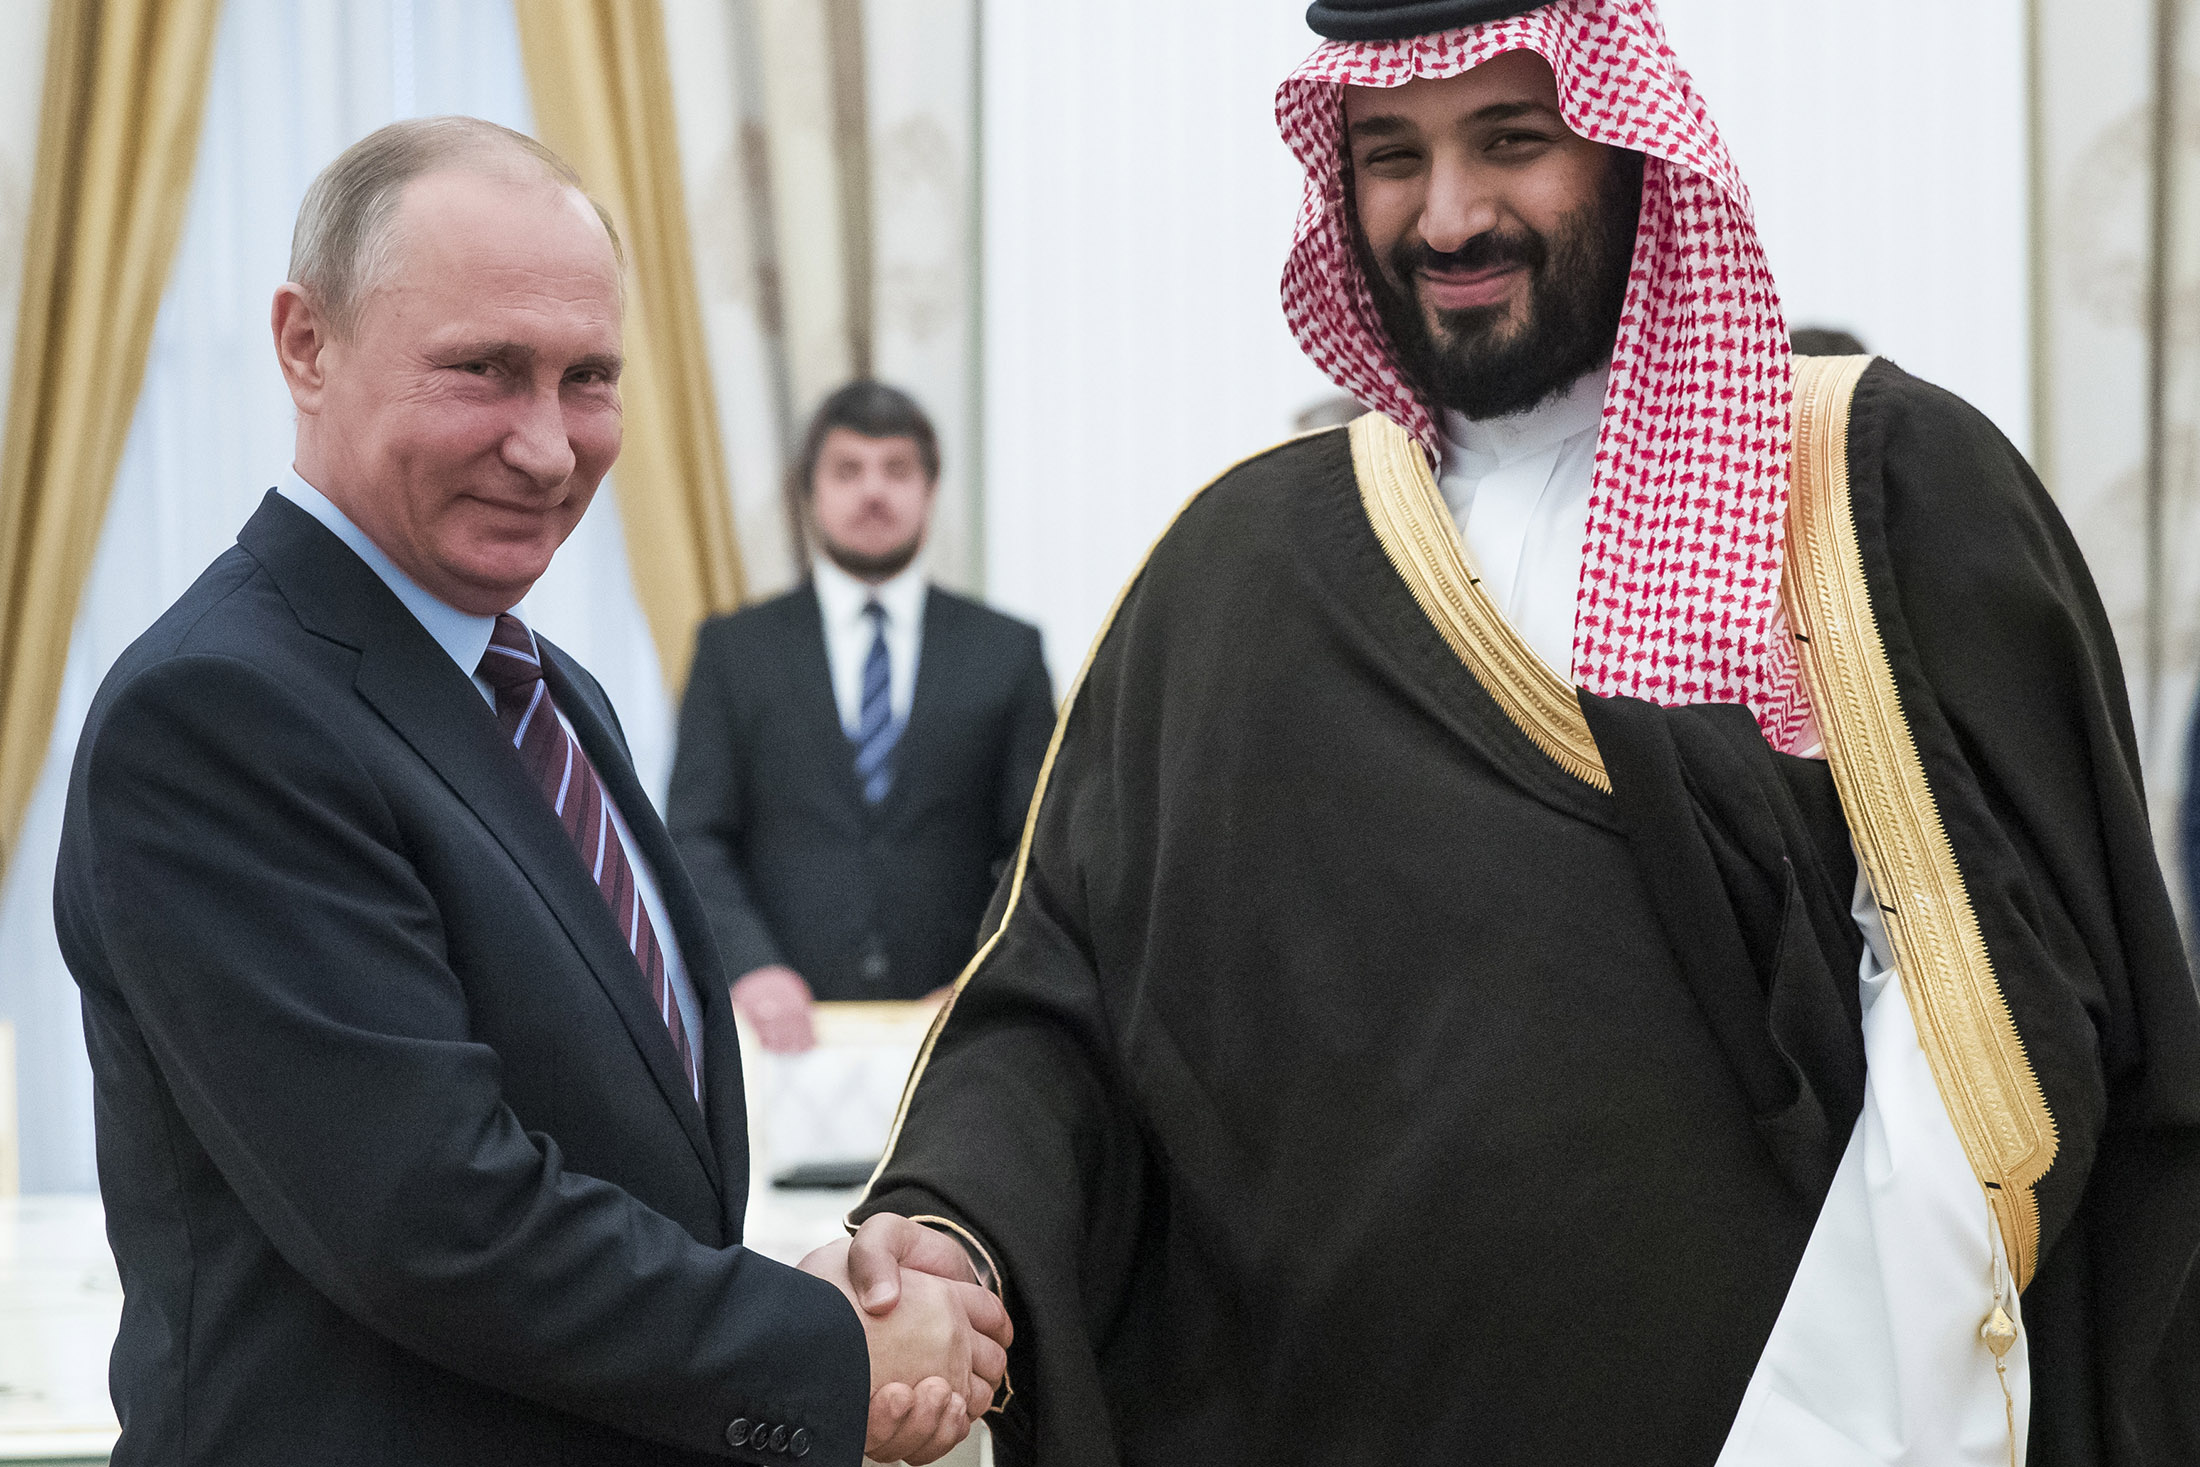 Putin Confronts His Fading Influence in the Mideast - Bloomberg